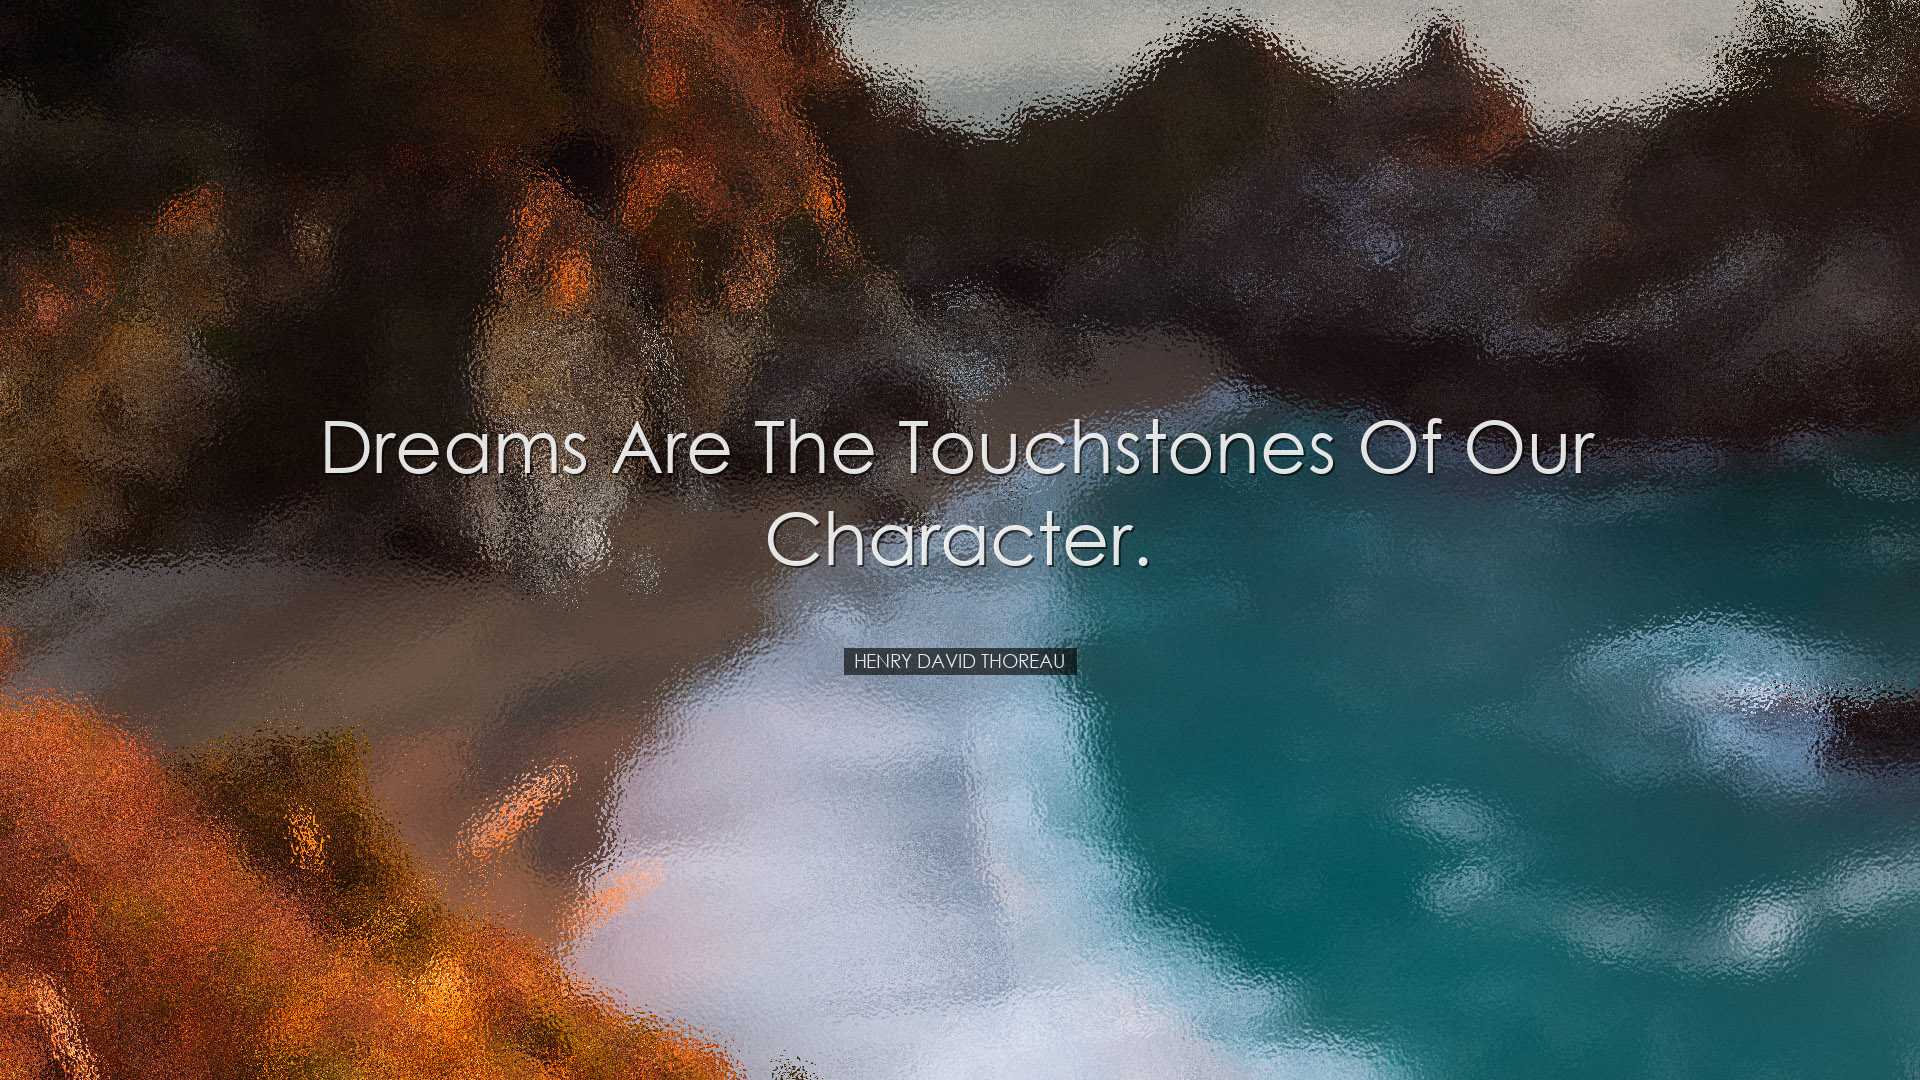 Dreams are the touchstones of our character. - Henry David Thoreau